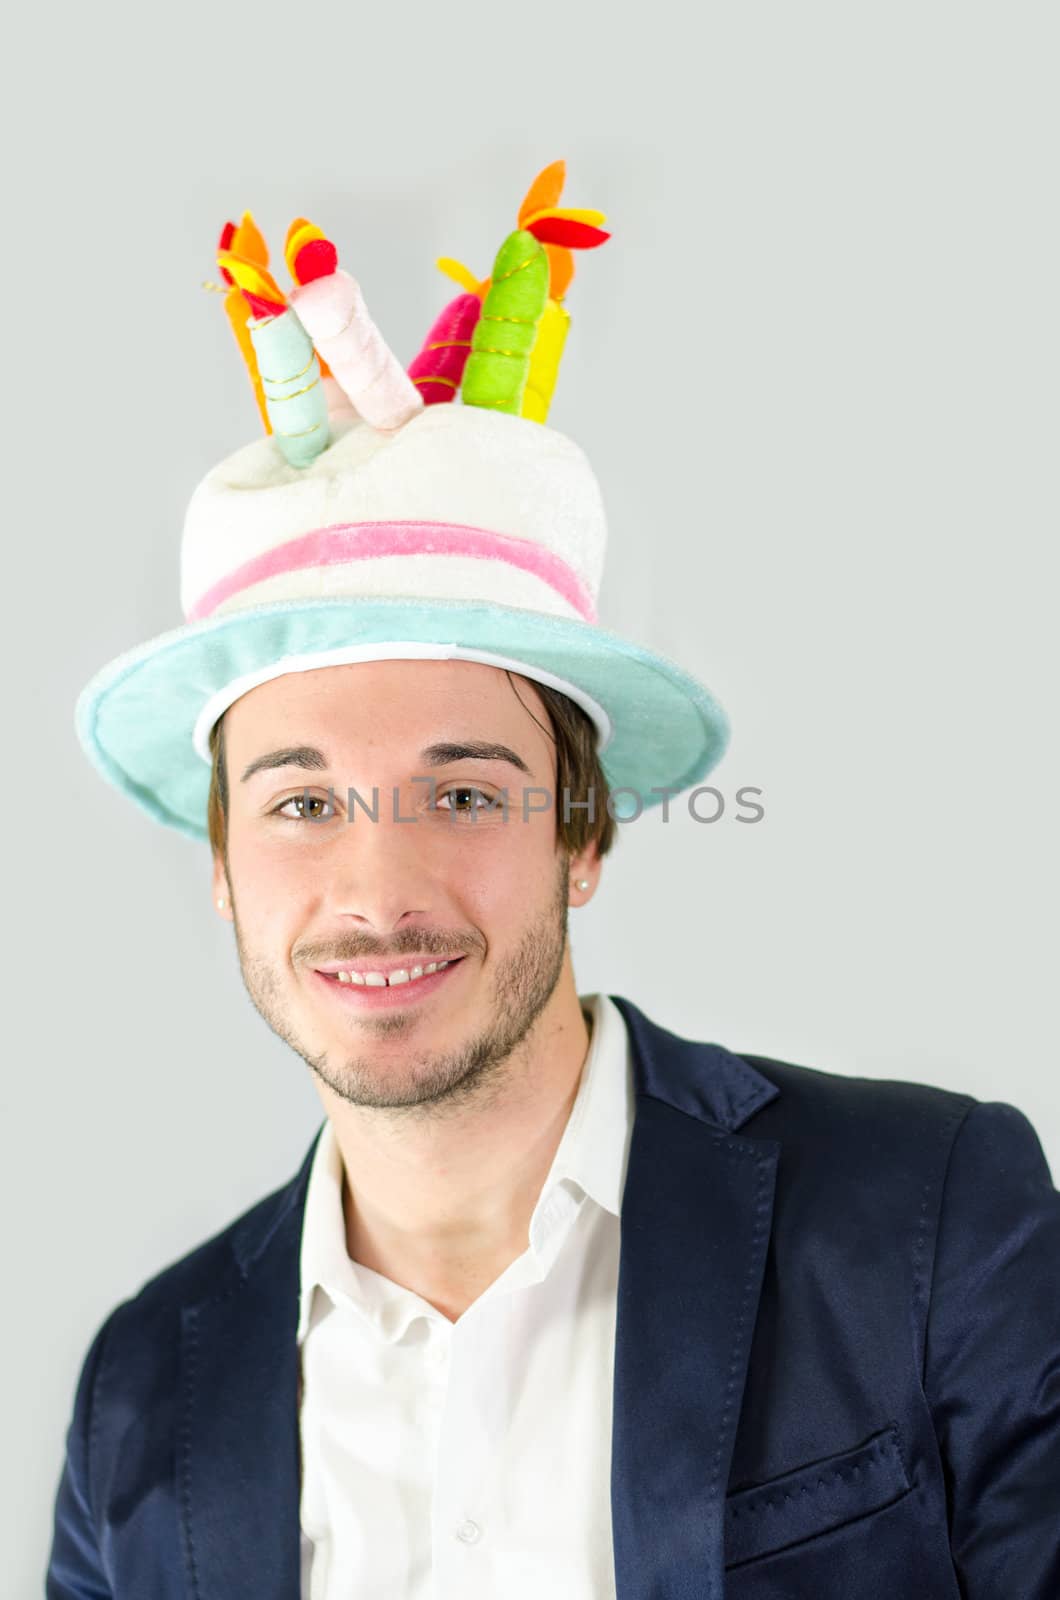 Cheerful, smiling, cute young man with funny birthday cake hat